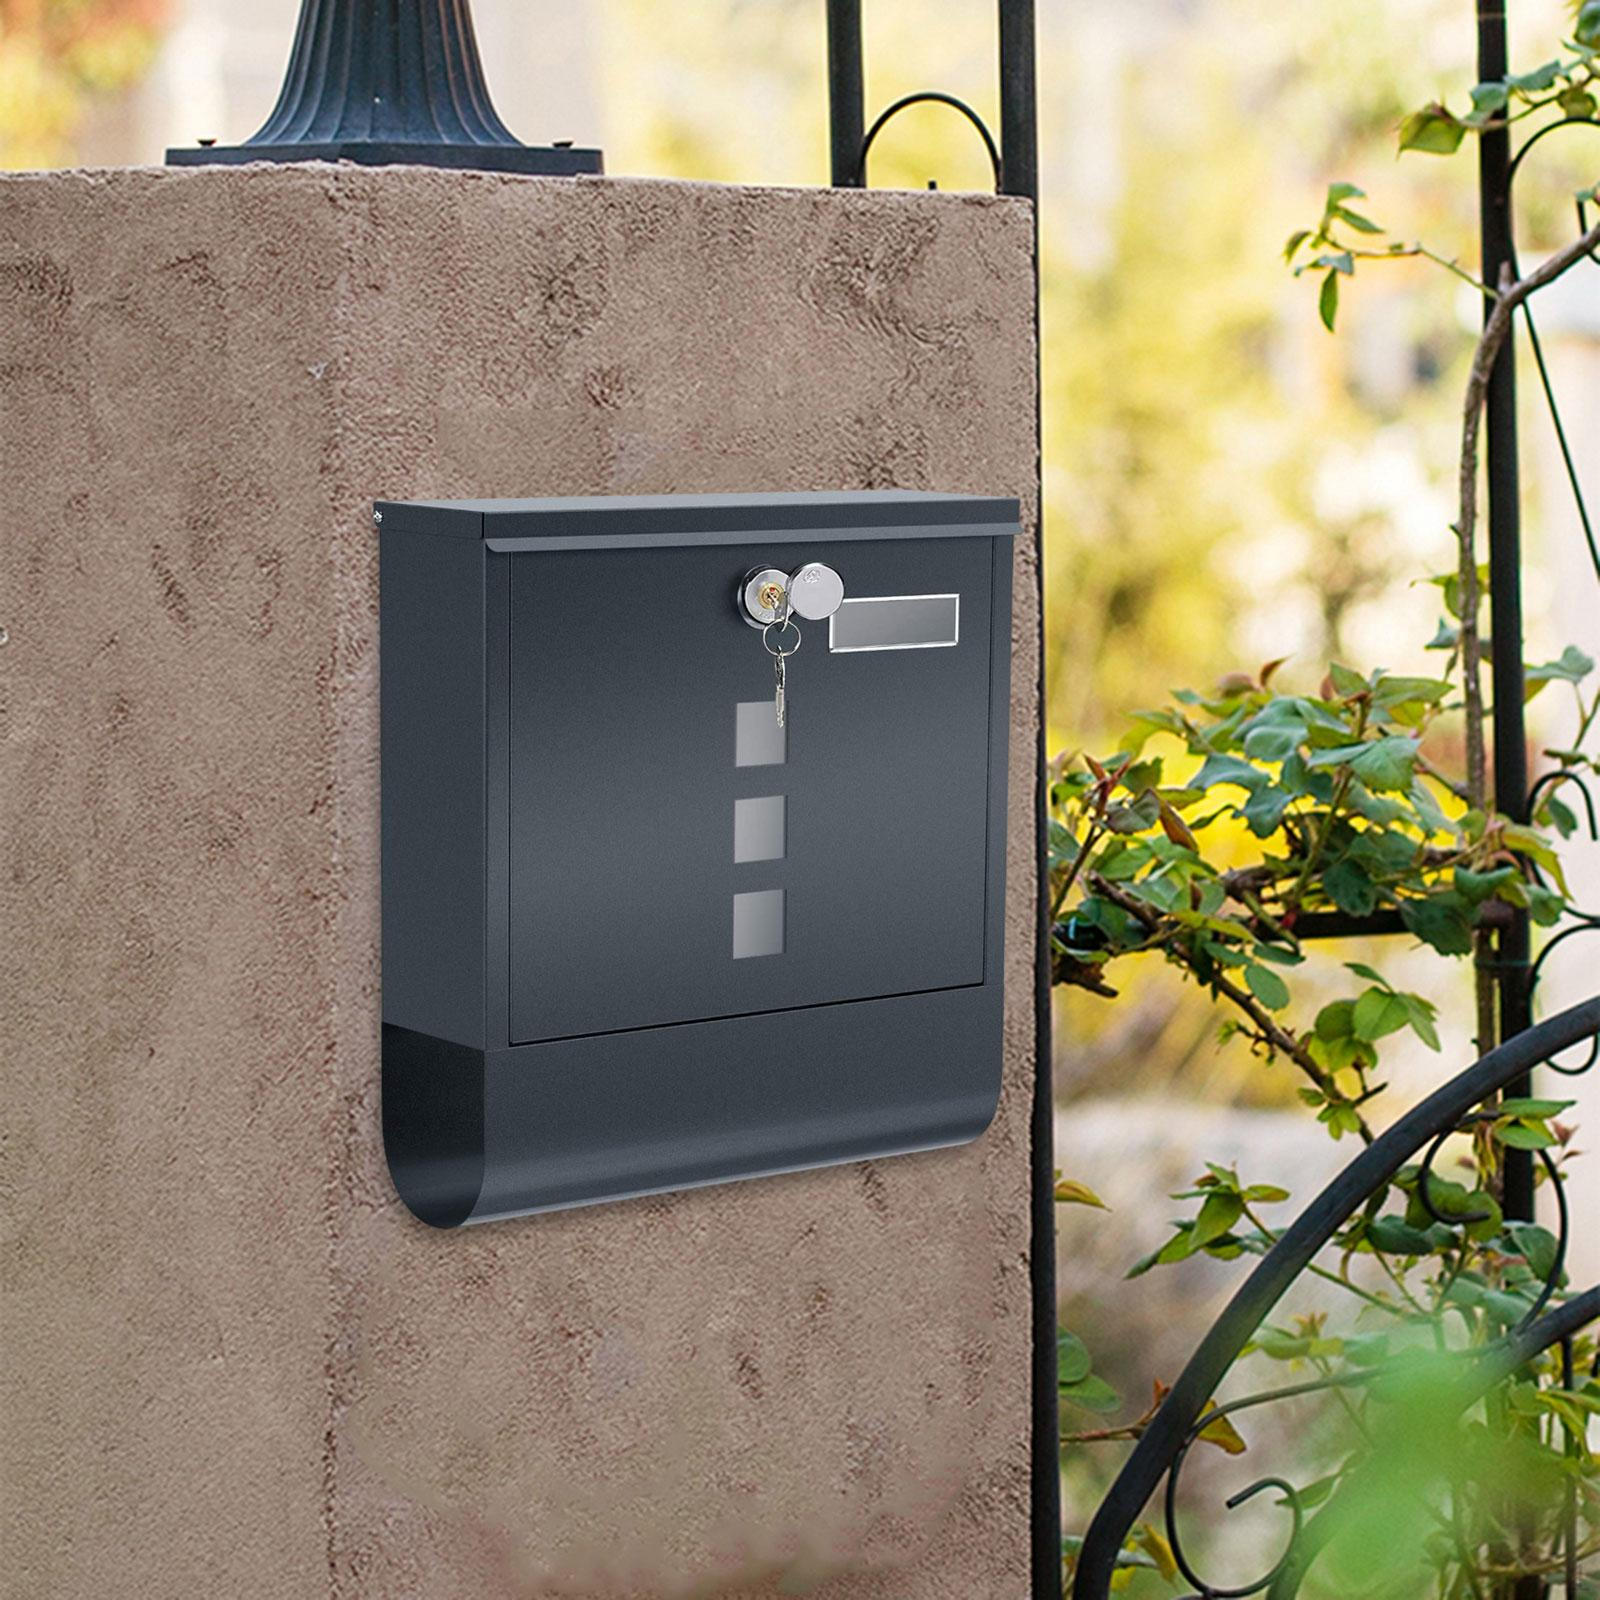 Drop Box with Lock Newspaper Holder Garden Decoration Collection Home Office Porch Wall